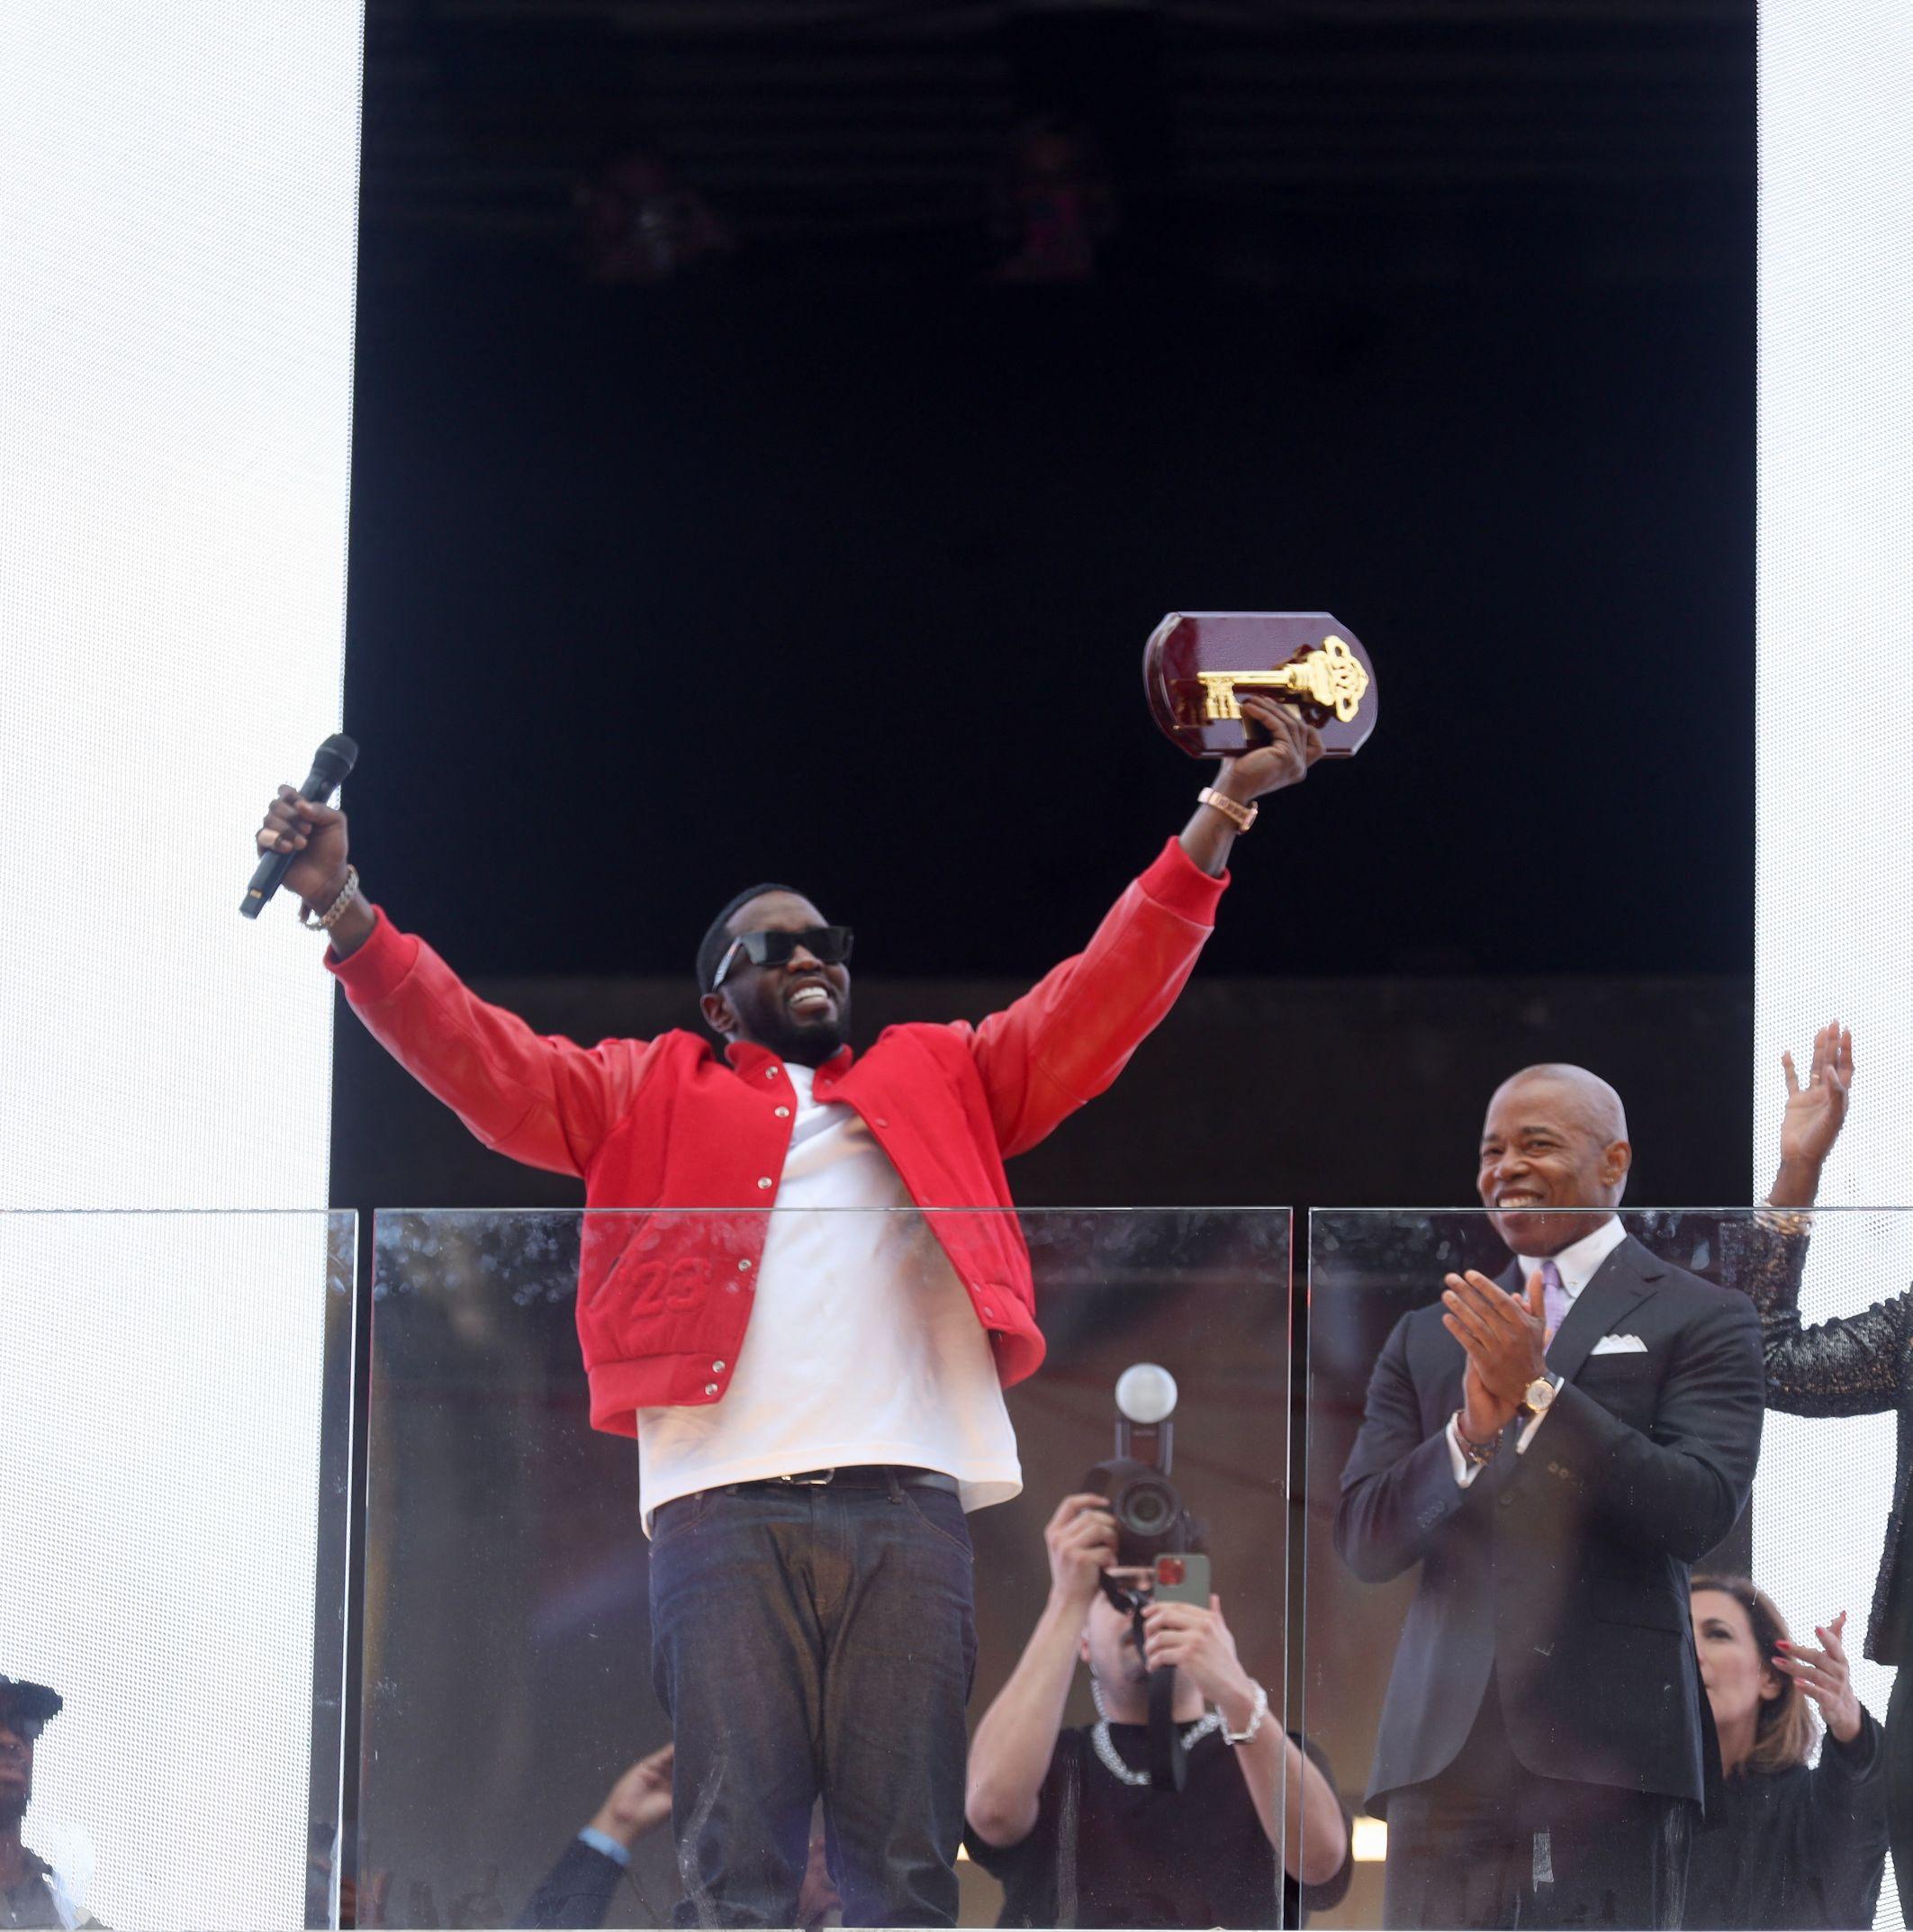 Mayor Eric Adams Awards Key to the City of New York to Sean Diddy Combs at VIP Space out in Times Square in New York.